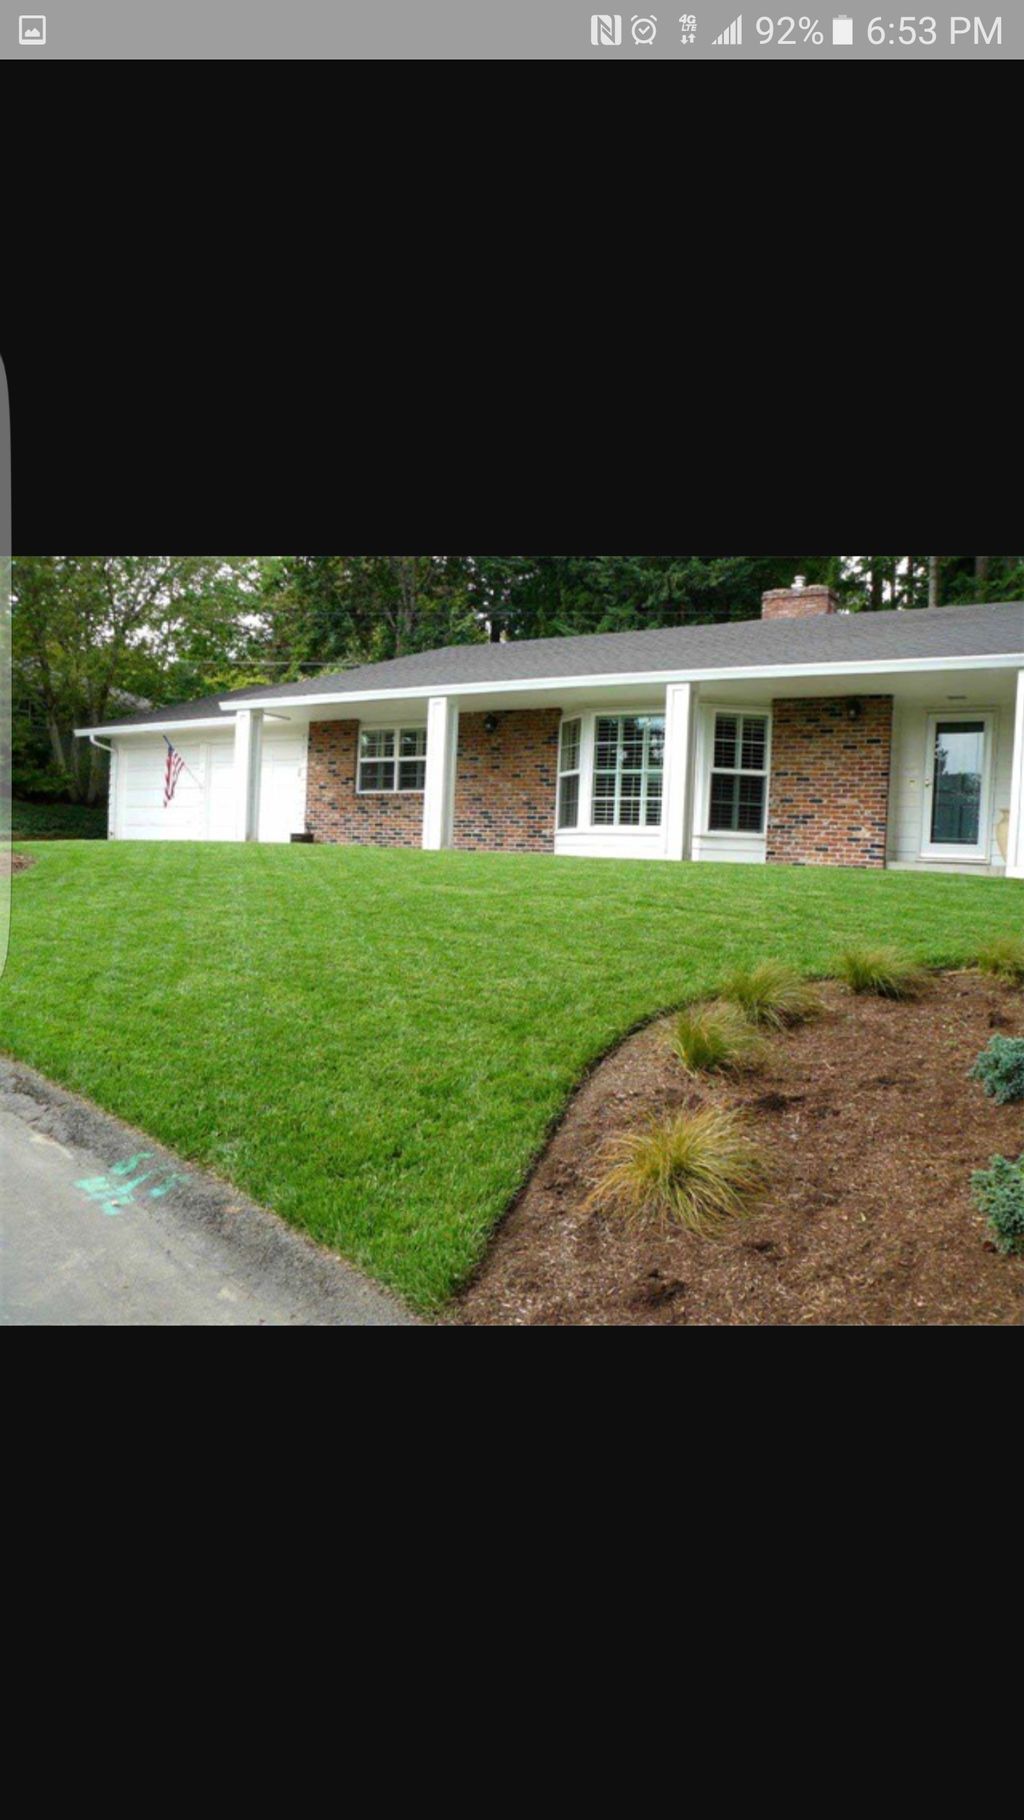 Landscaping and concret and paint